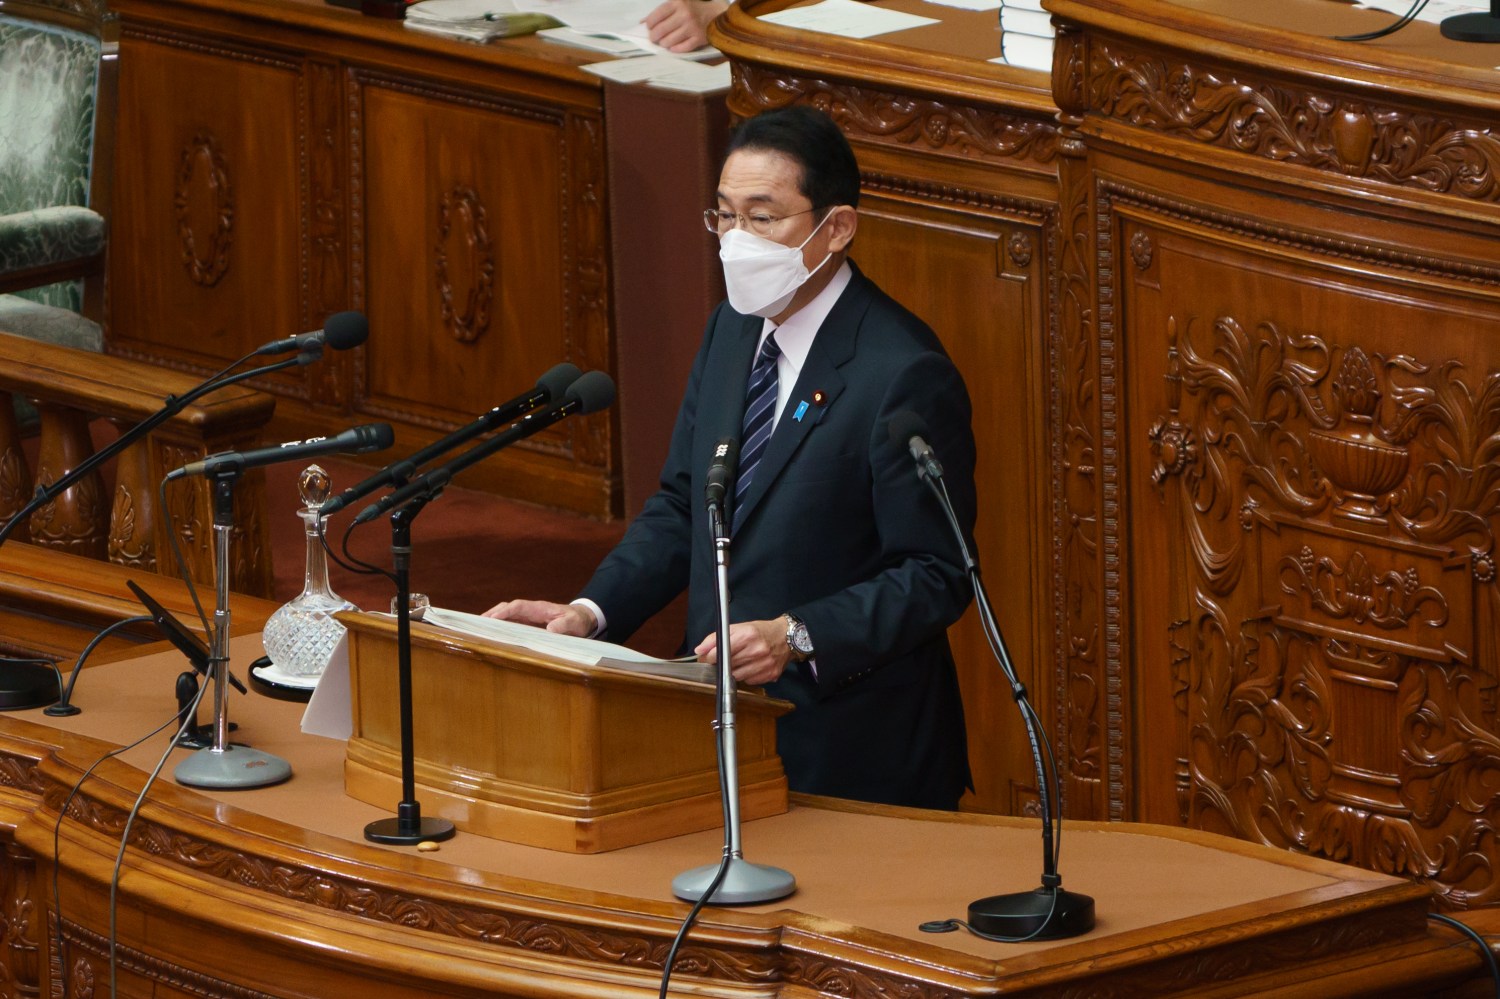 Japanese Prime Minister Fumio Kishida delivers his policy speech during a ordinary parliamentary session at the National Diet in Tokyo, Japan on January, 17, 2022. (Photo Motoo Naka/AFLO) No Use China. No Use Taiwan. No Use Korea. No Use Japan.